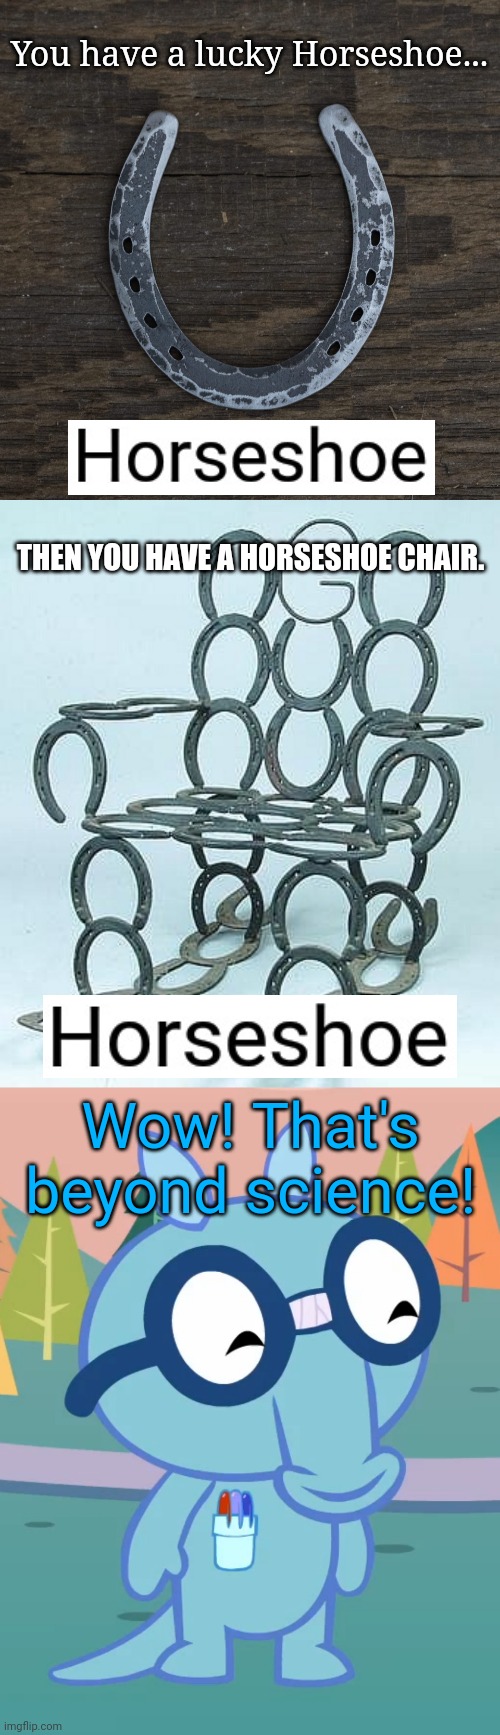 Horseshoe | You have a lucky Horseshoe... THEN YOU HAVE A HORSESHOE CHAIR. Wow! That's beyond science! | image tagged in horseshoe chair,horseshoe theory,happy sniffles htf,horseshoe,crossover,funny | made w/ Imgflip meme maker